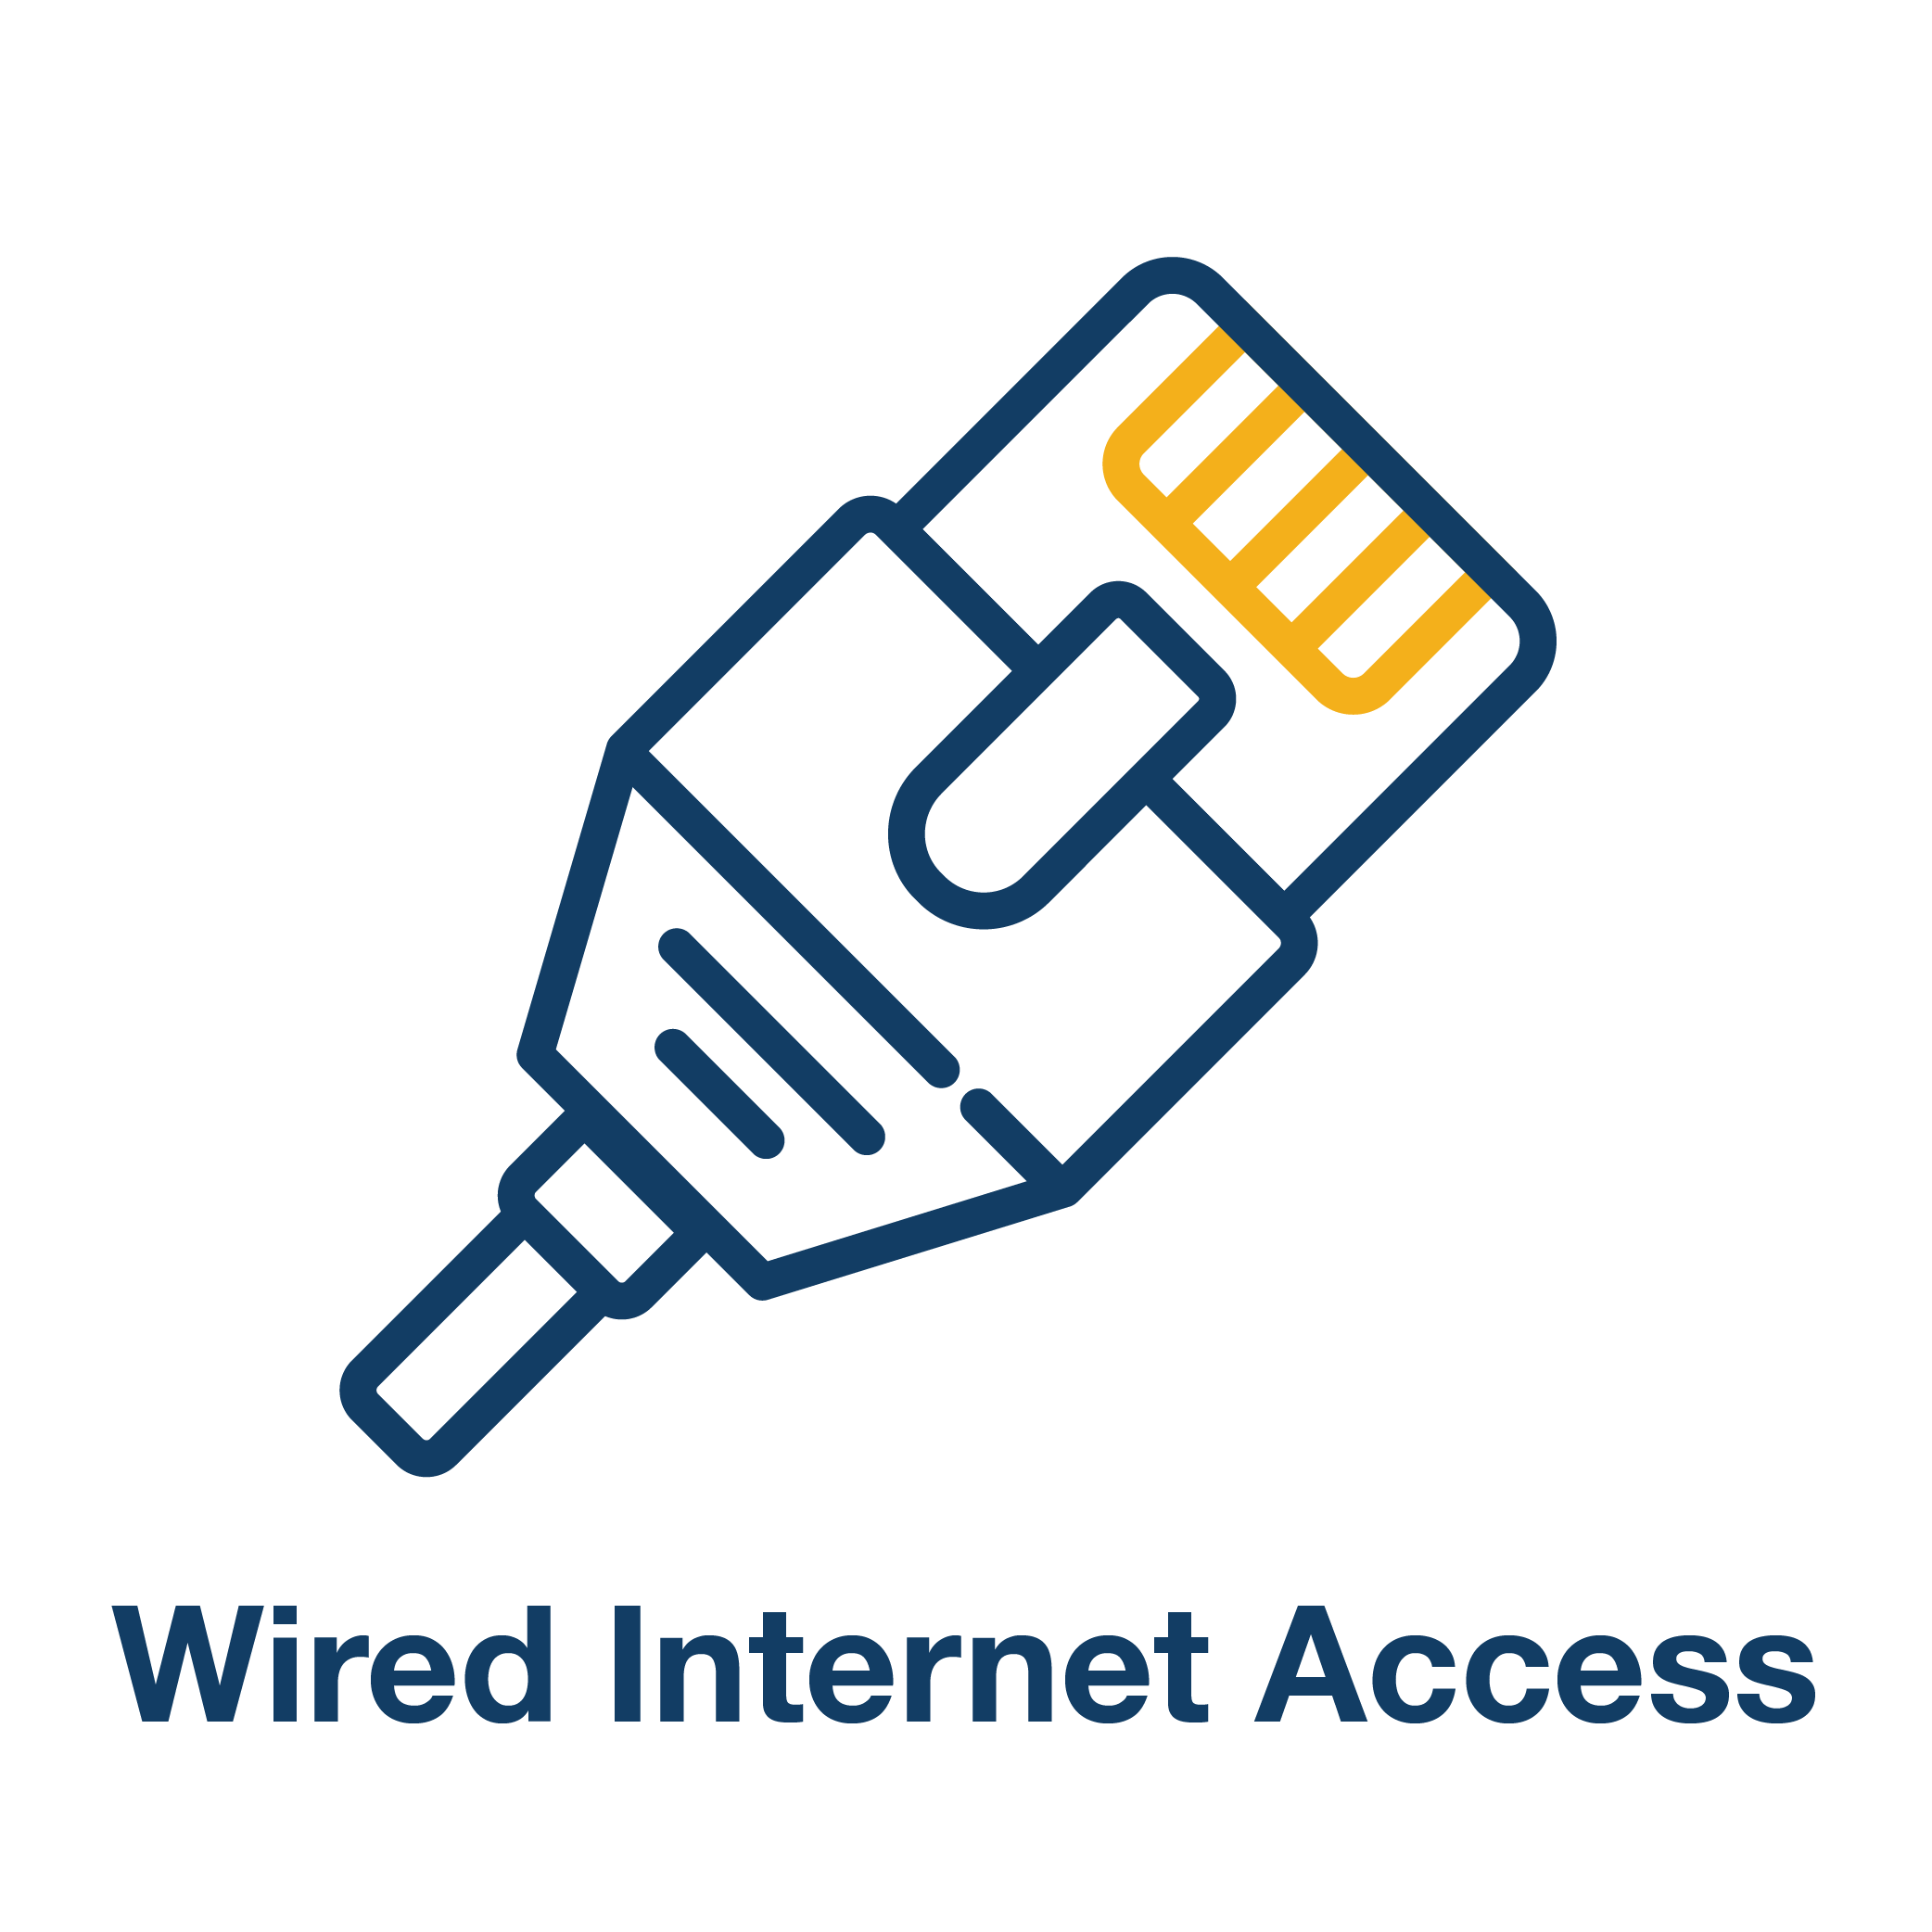 Wired Internet Access